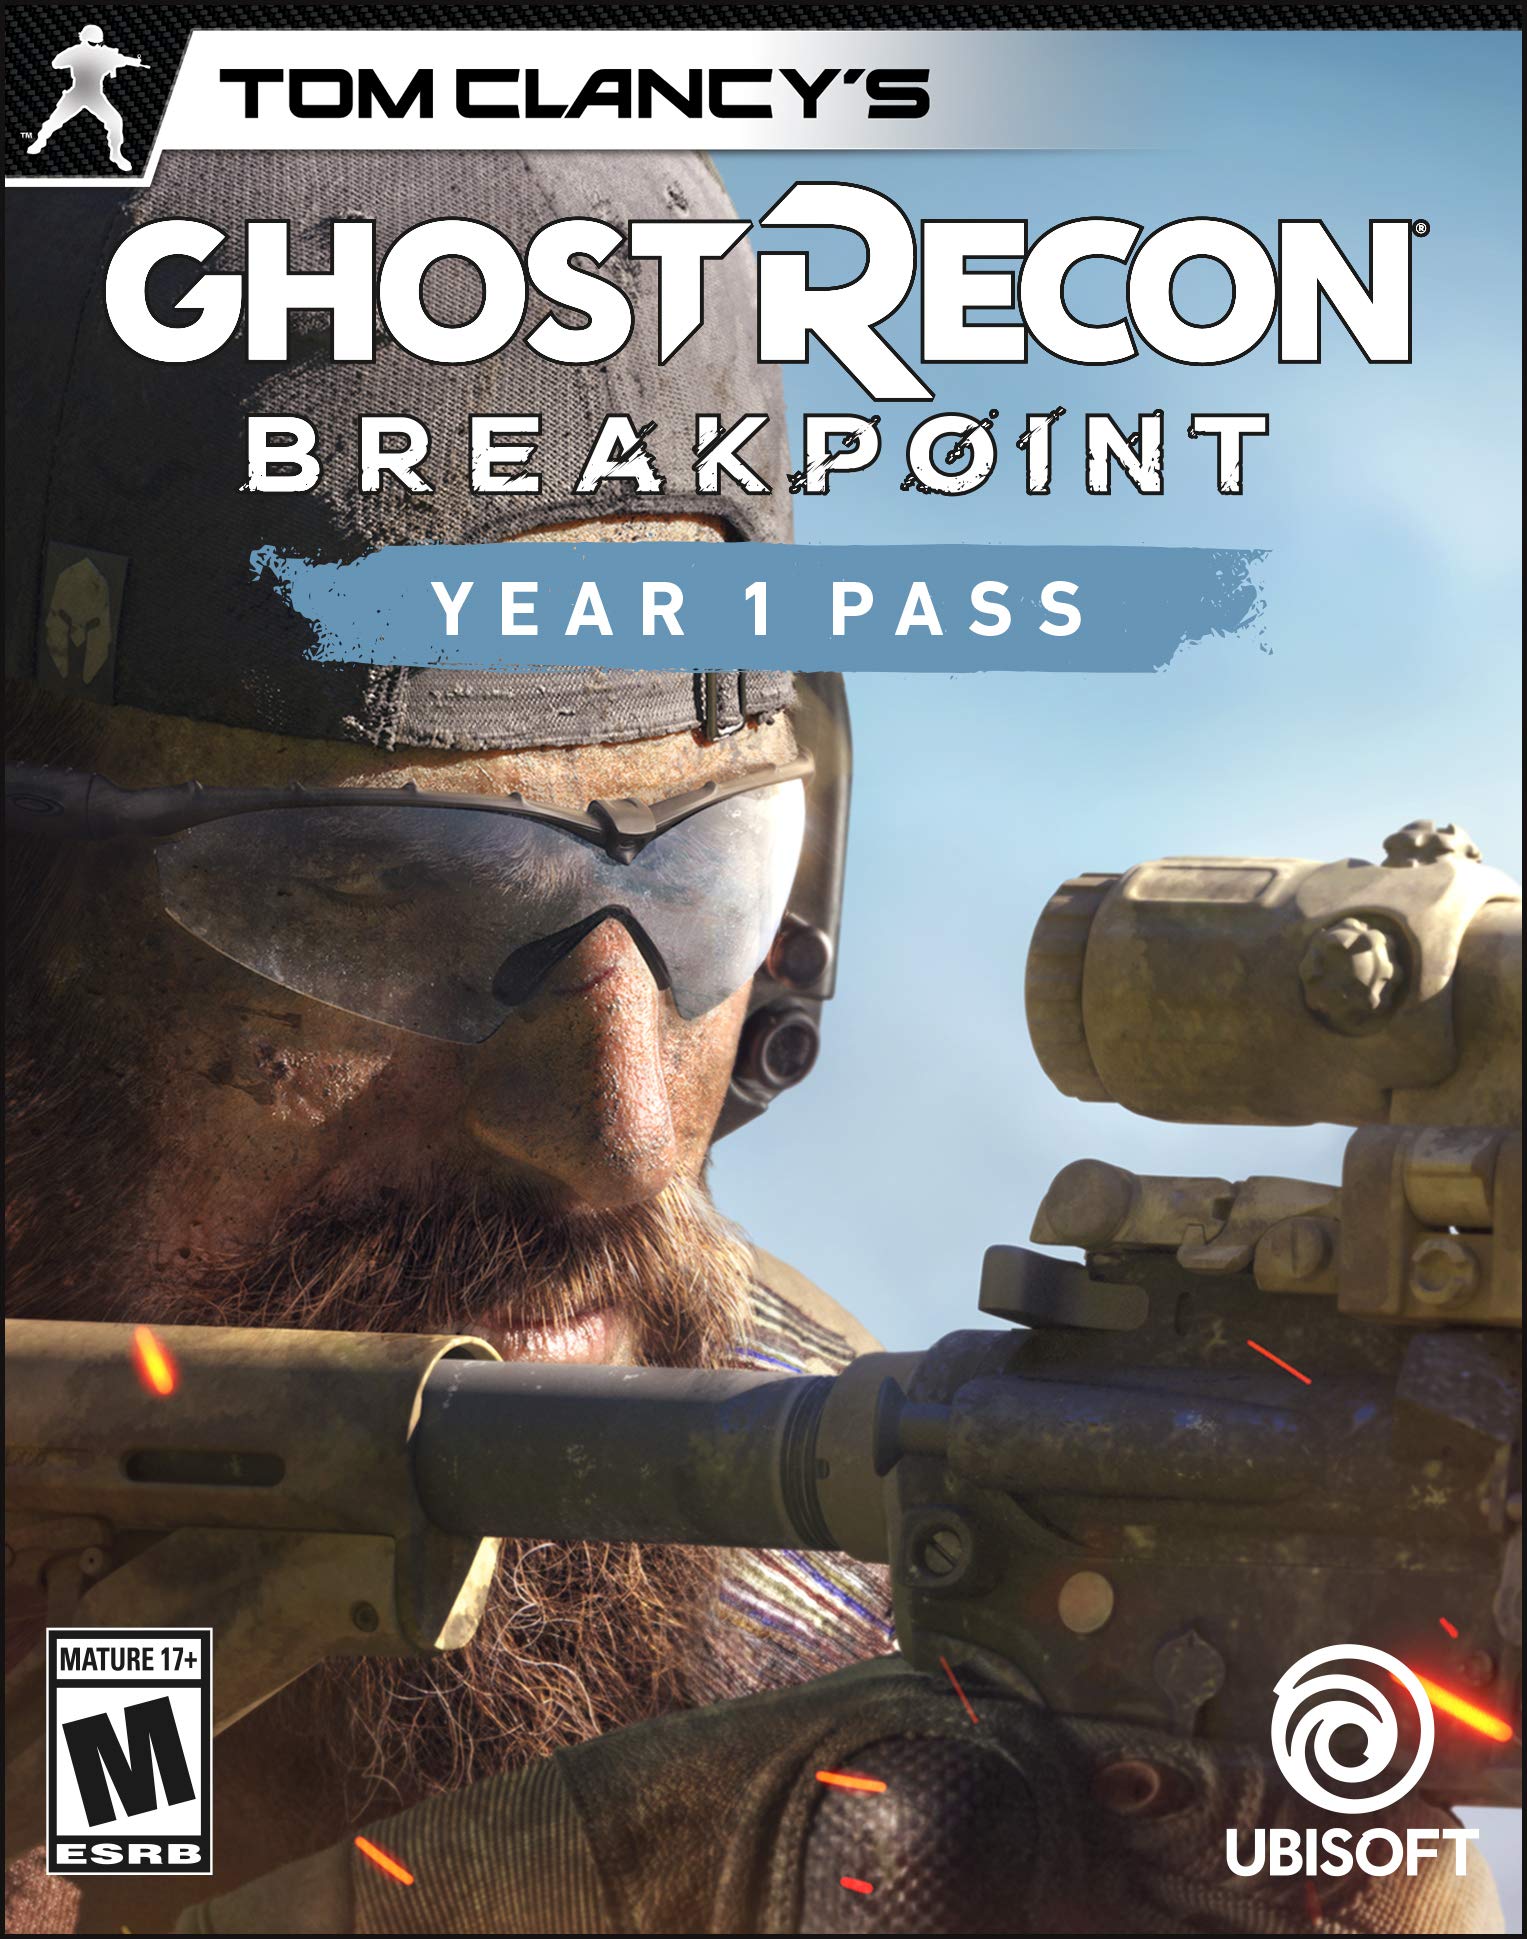 Tom Clancy’s Ghost Recon Breakpoint Year 1 Pass | PC Code - Ubisoft Connect